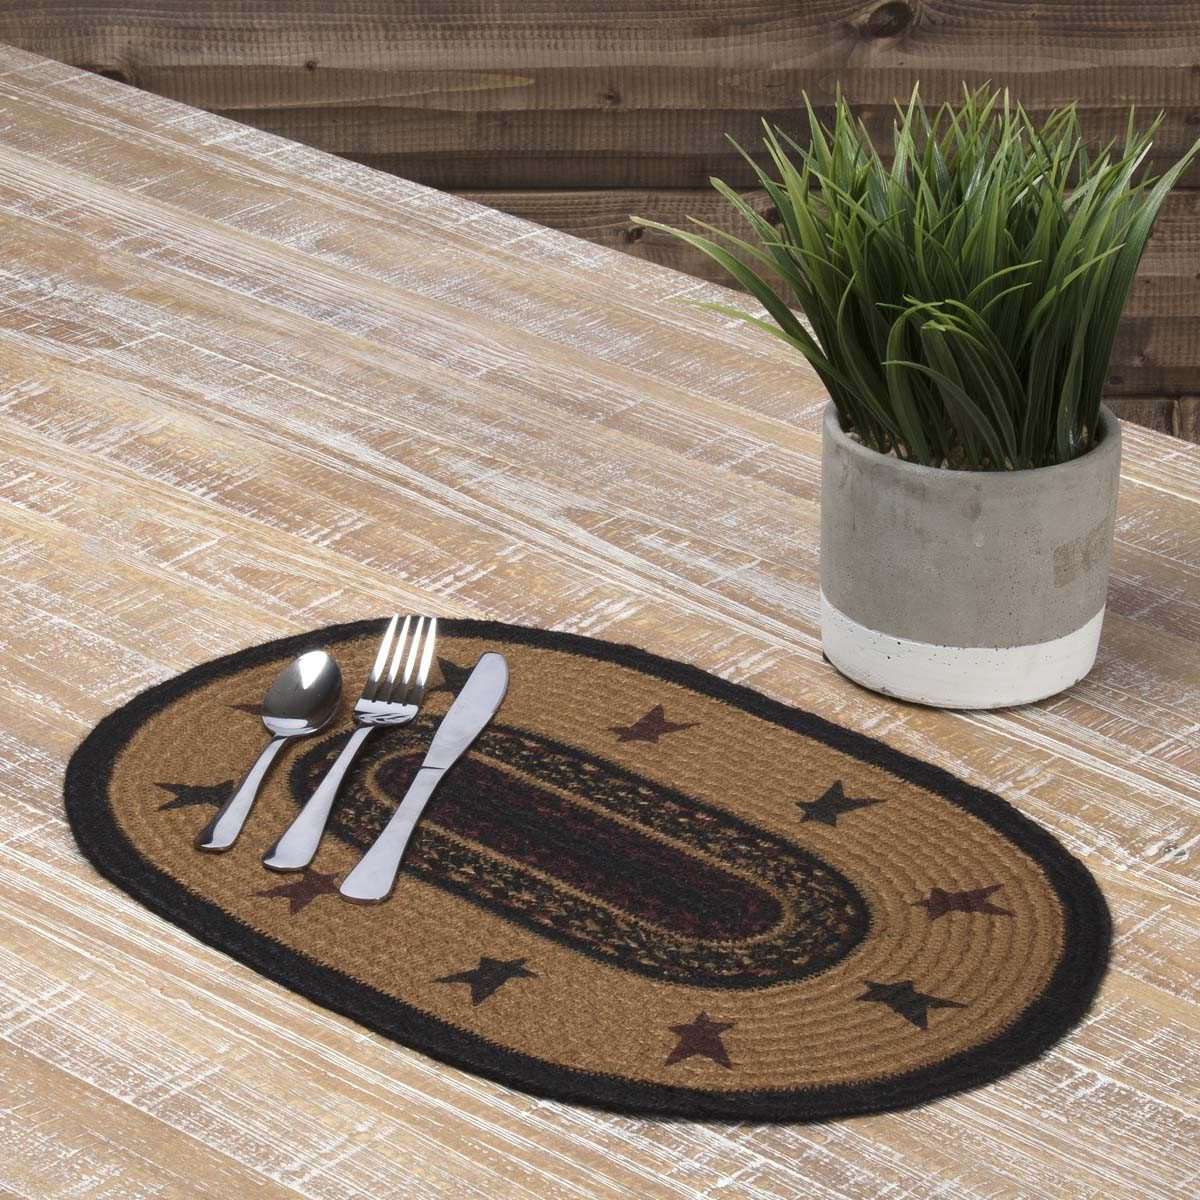 Heritage Farms Star Jute Braided Placemat Set of 6 VHC Brands - The Fox Decor